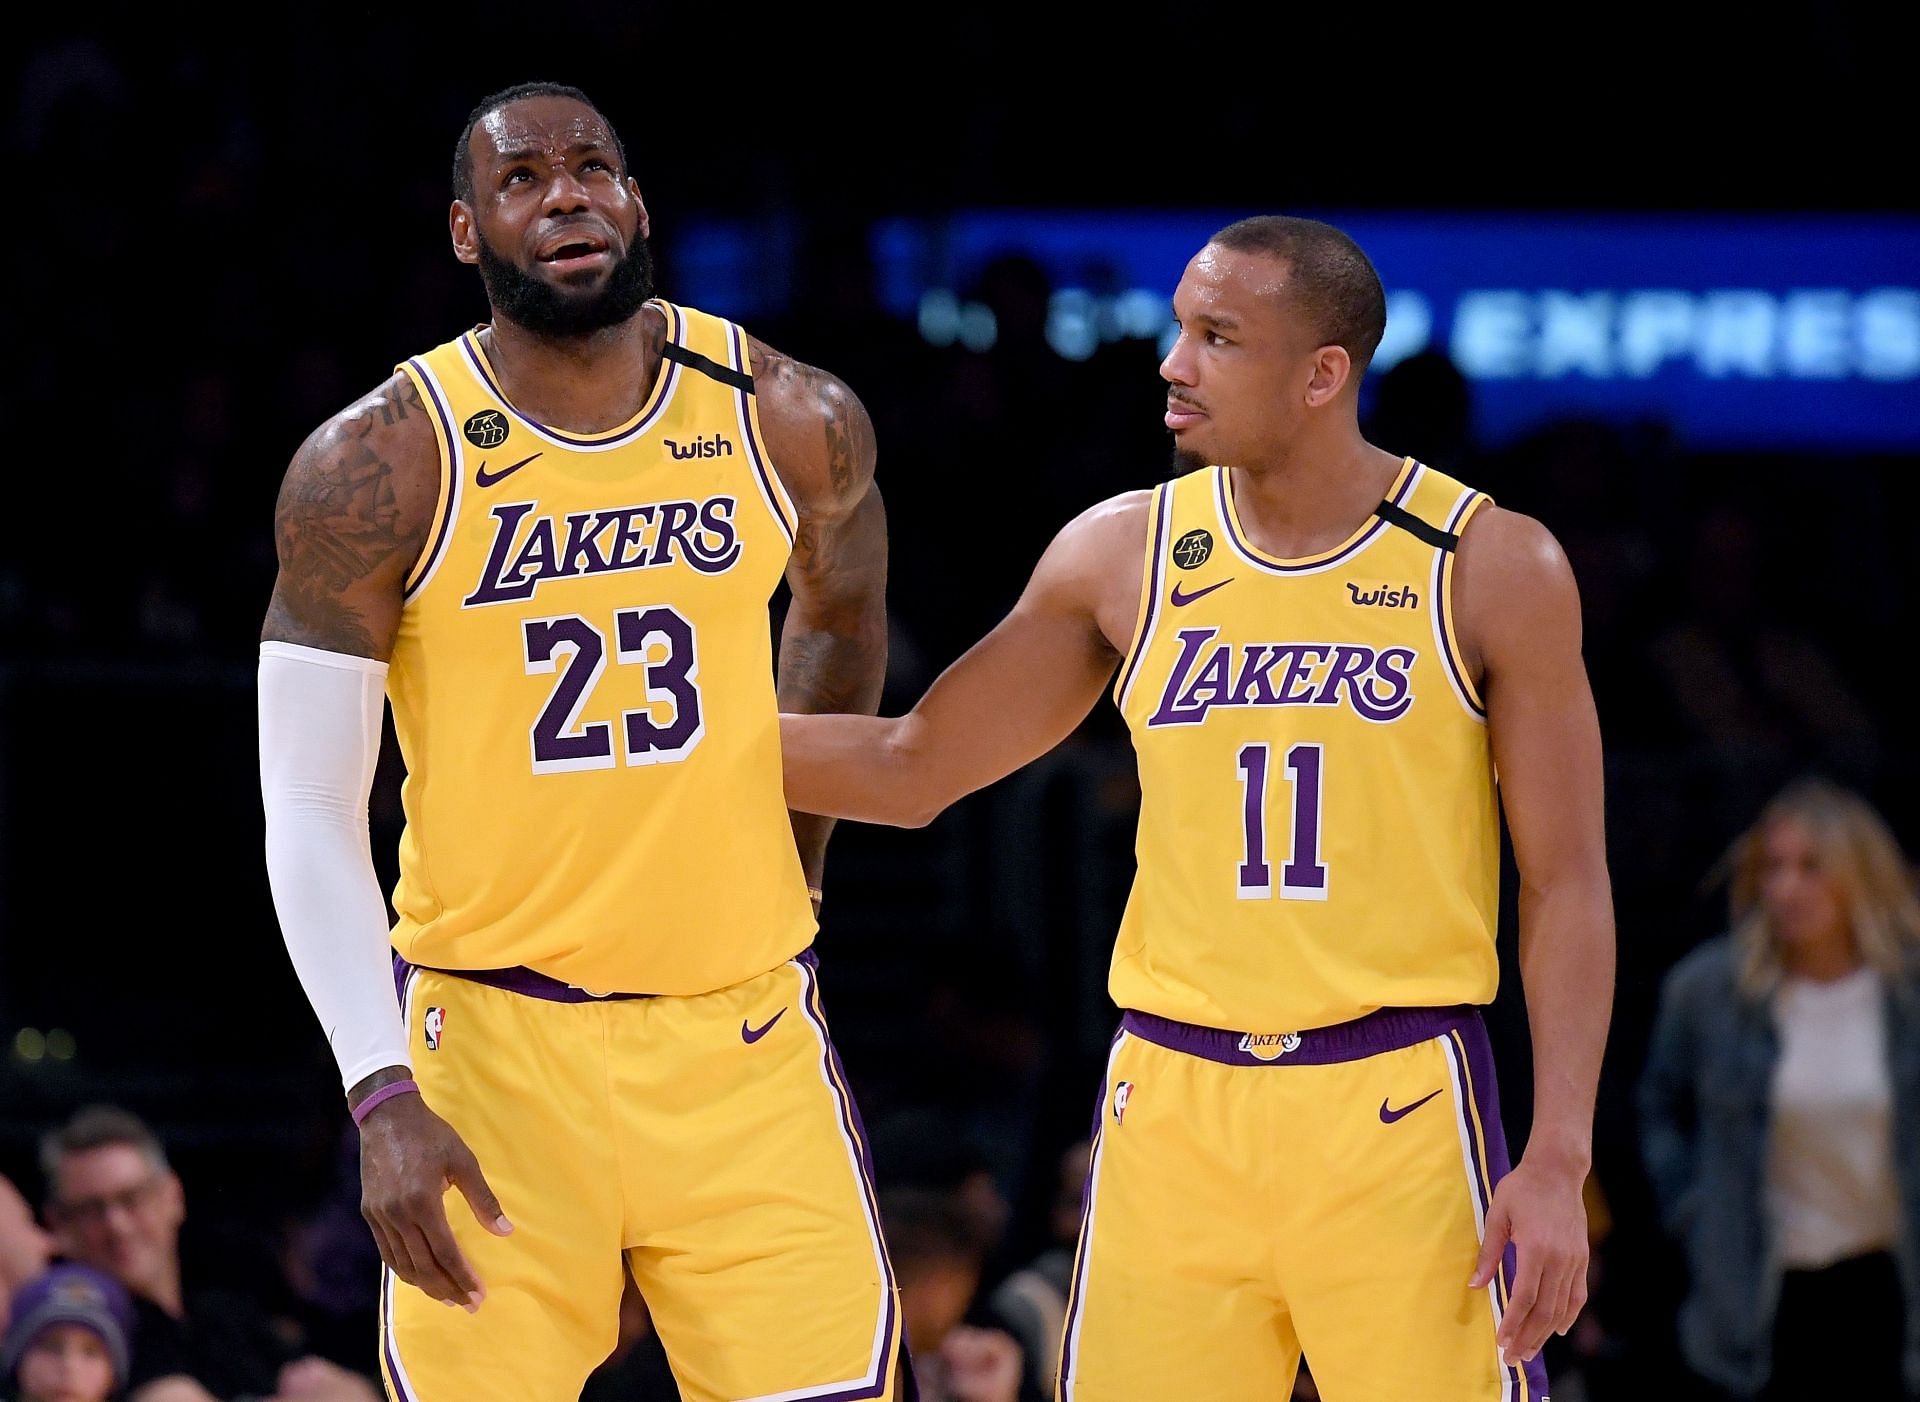 LA Lakers' Avery Bradley Forgoes Championship Games to Stay With Family